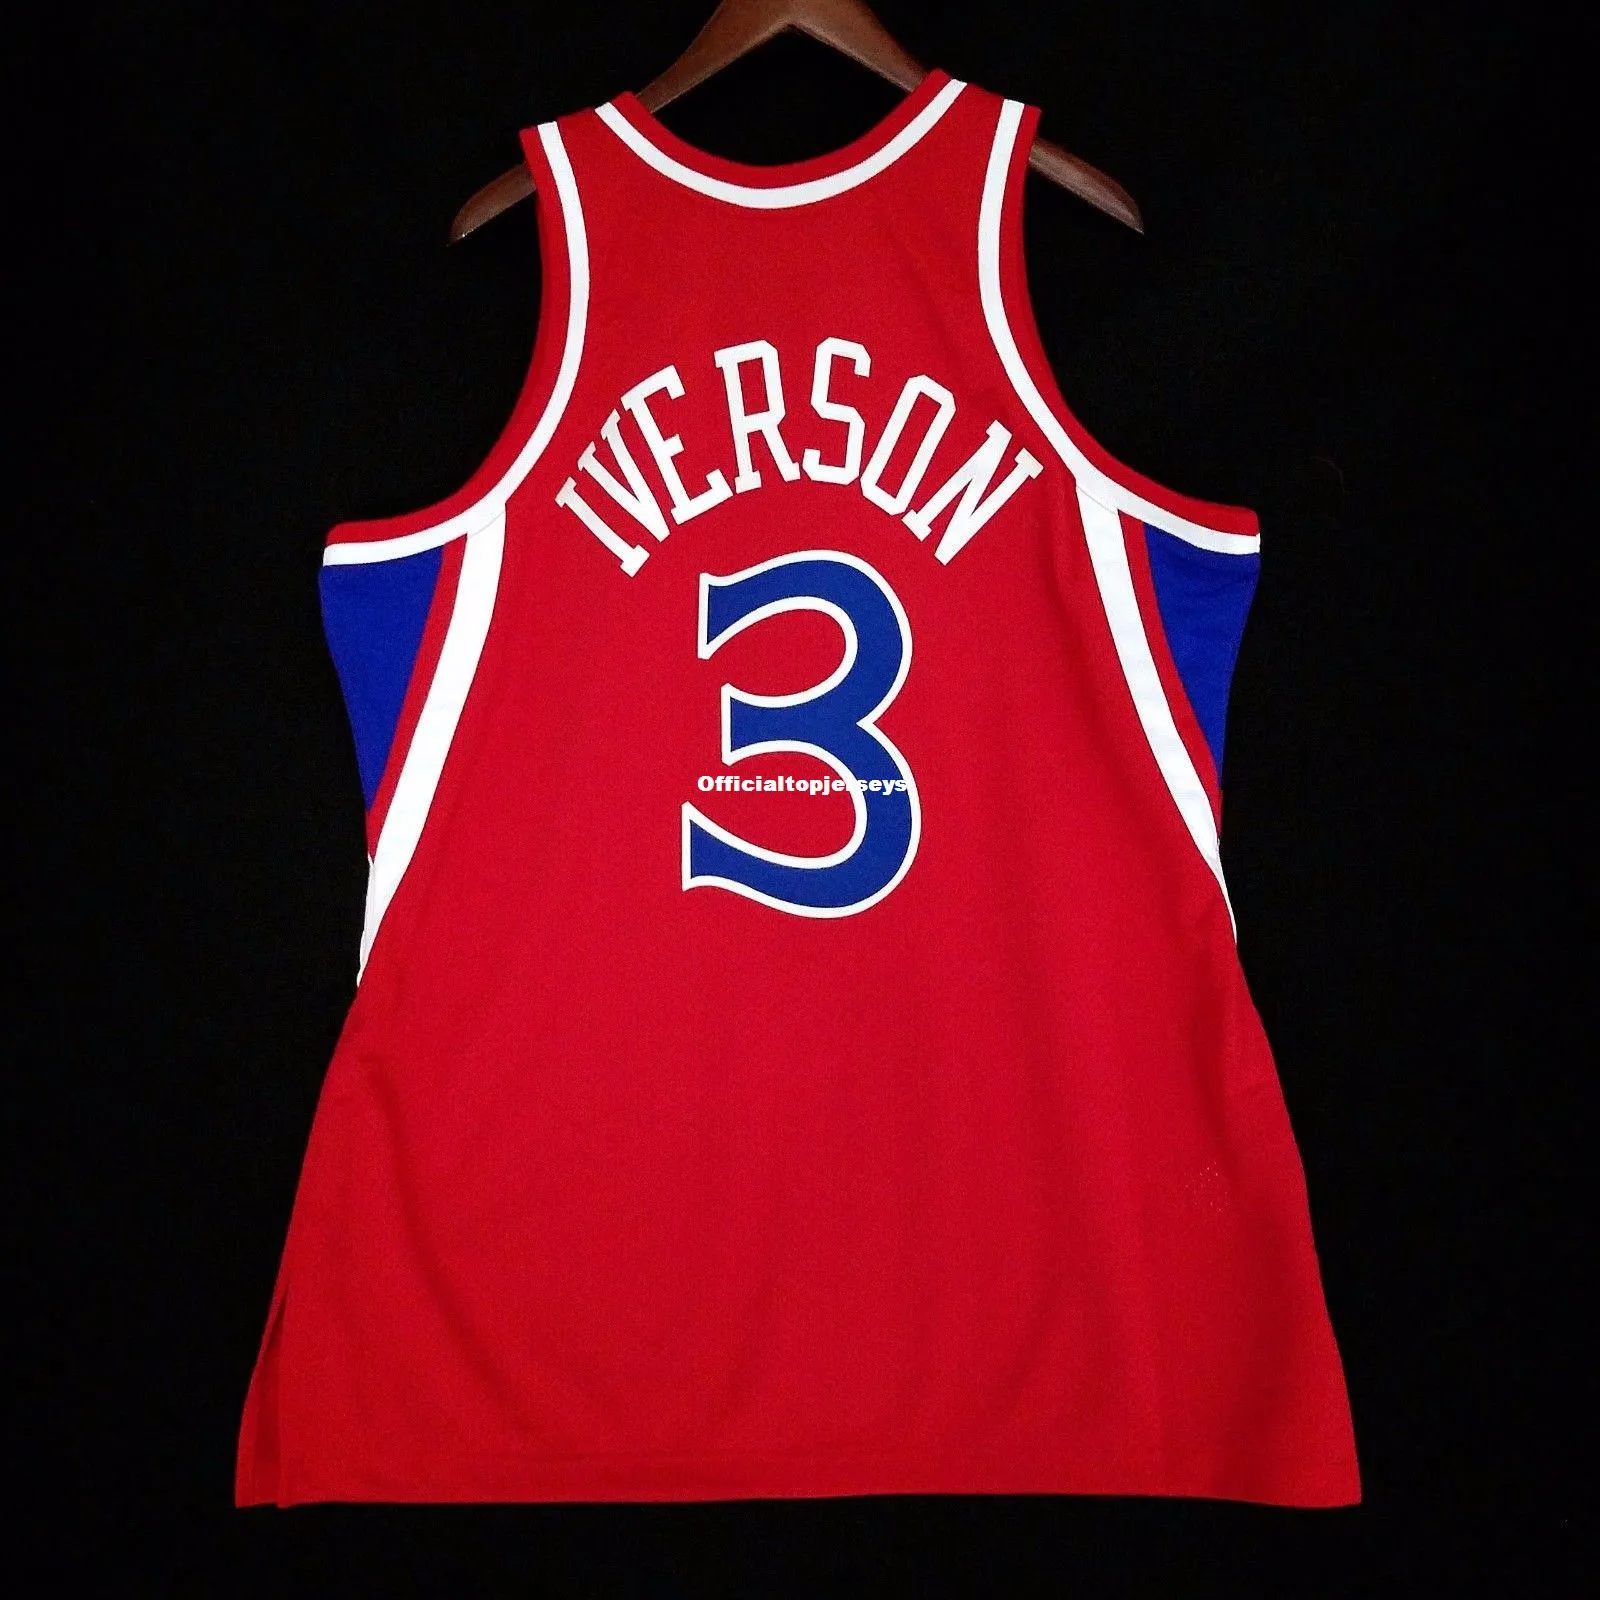 100% Stitched Mitchell & Ness Allen Iverson #3 wholesale Red Jersey Mens Vest Size XS-6XL Stitched basketball Jerseys Ncaa